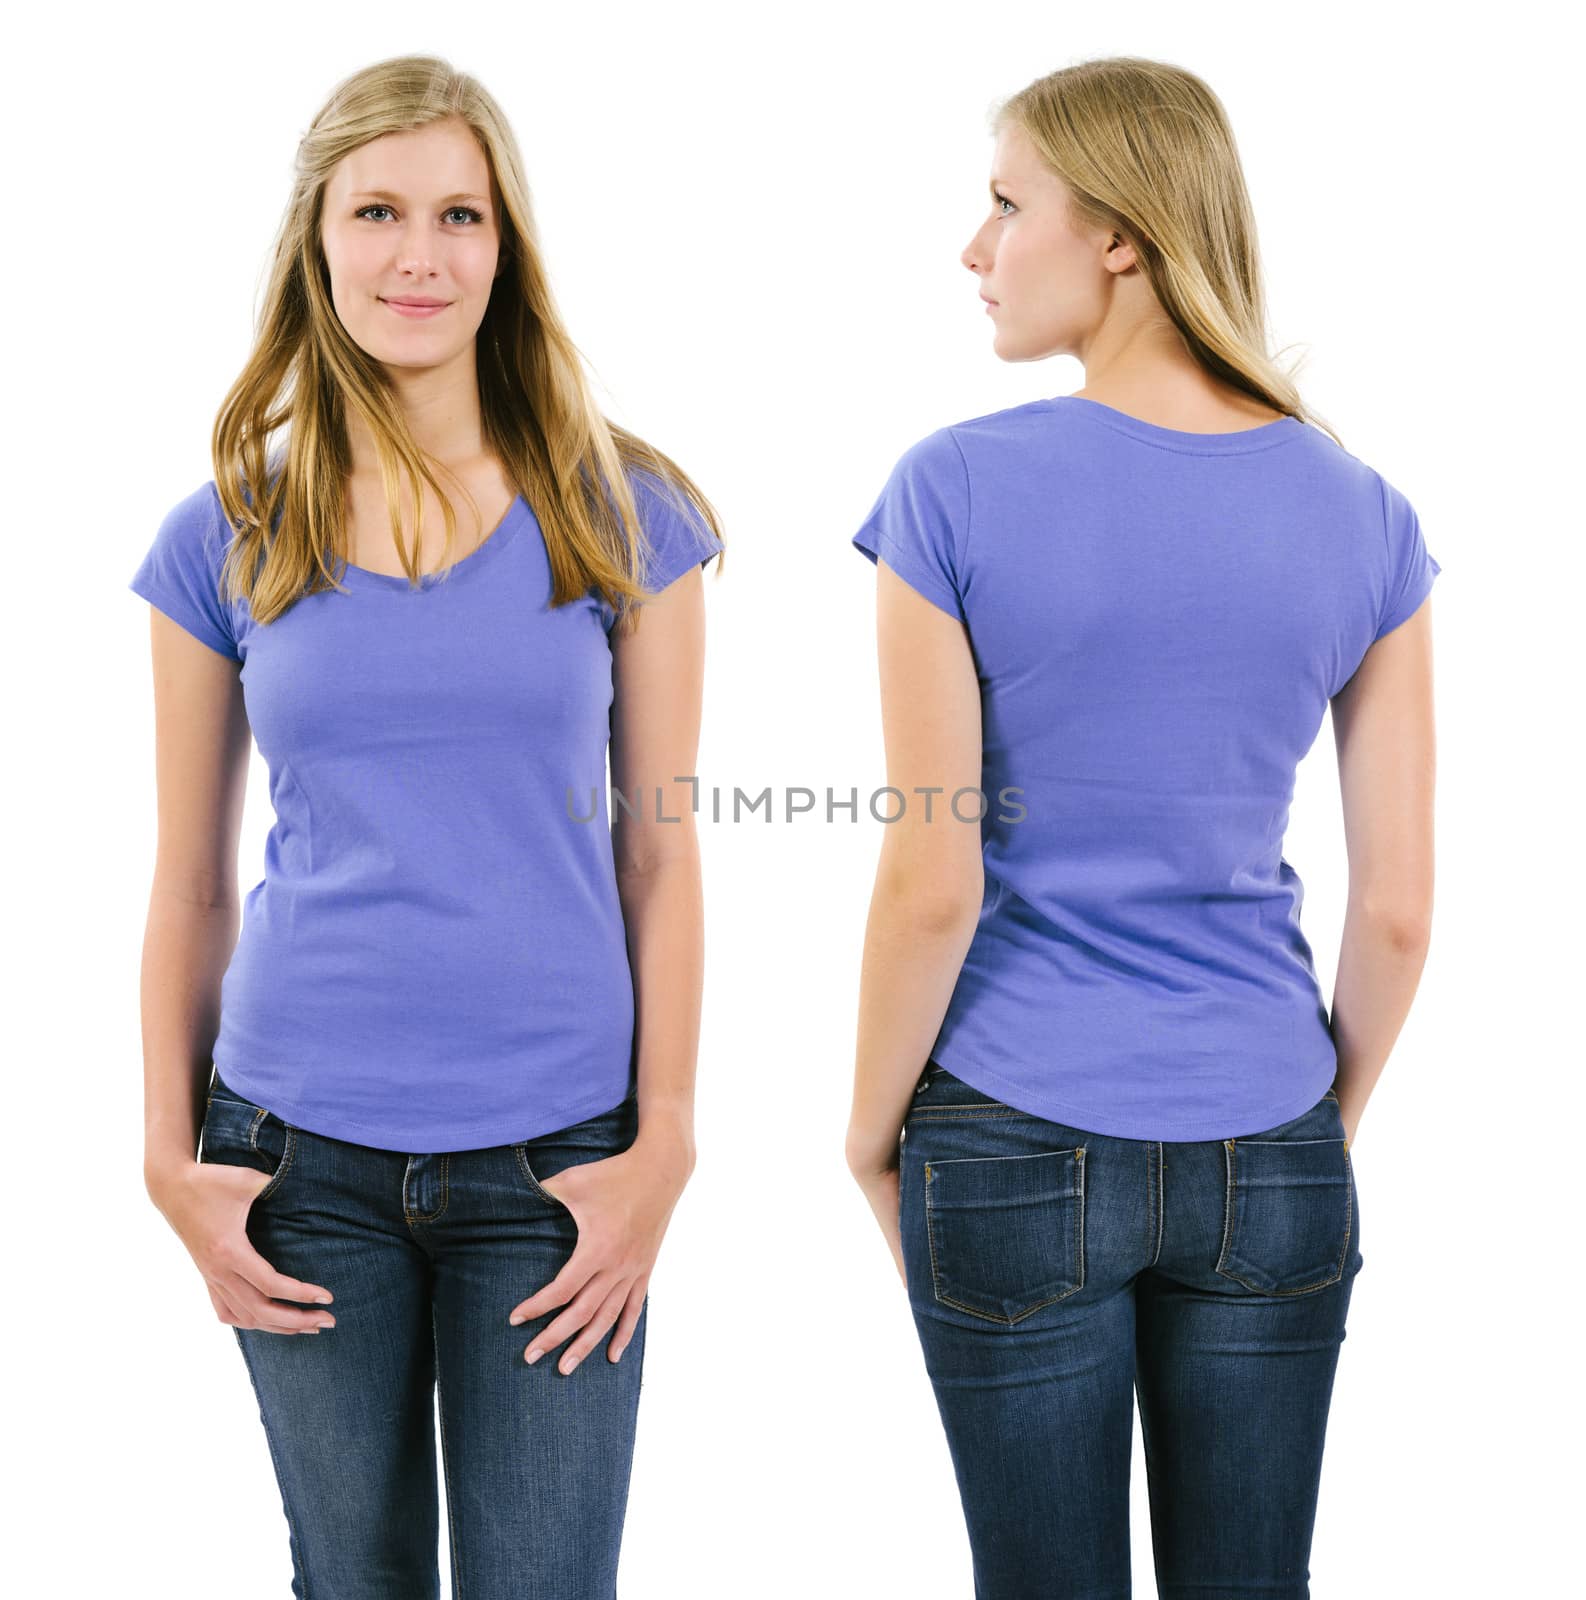 Photo of a young adult female posing with a blank purple shirt.  Front and back views ready for your artwork or designs.